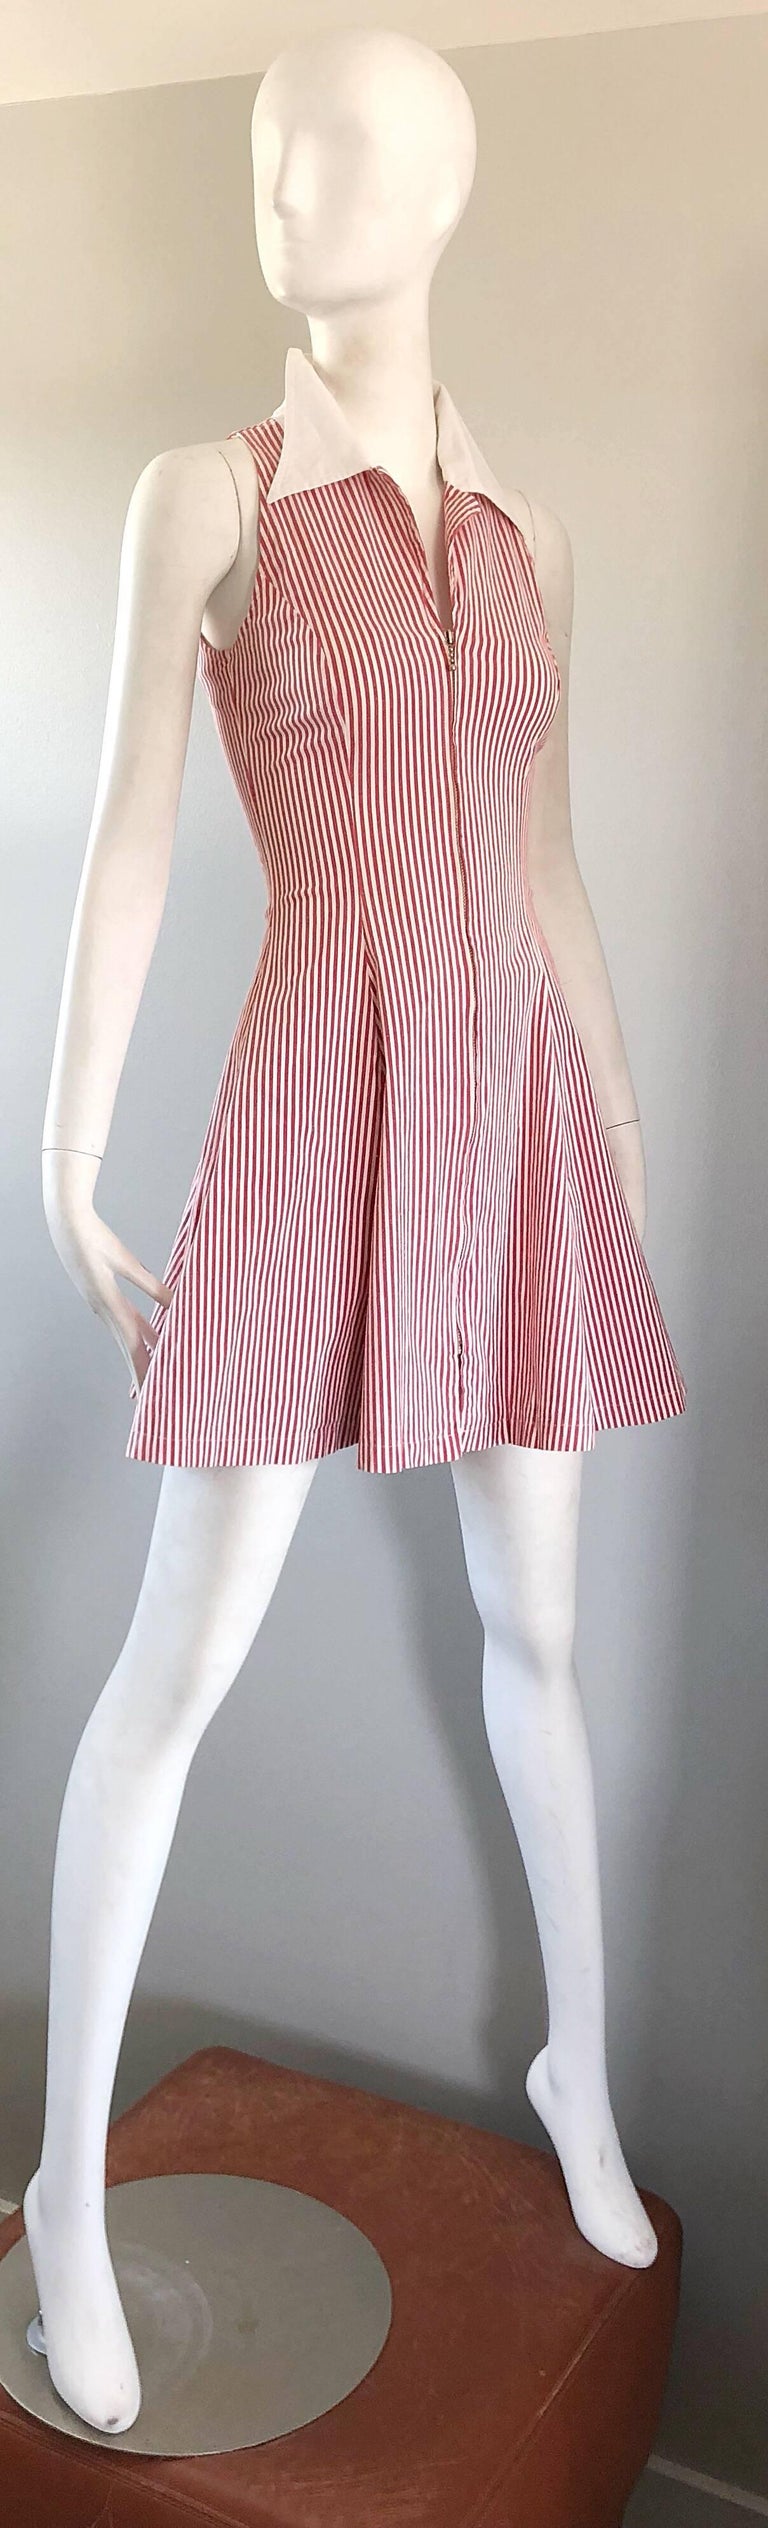 1980s Angelo Tarlazzi Vintage Red and White Seersucker Nautical Striped Dress  For Sale 2